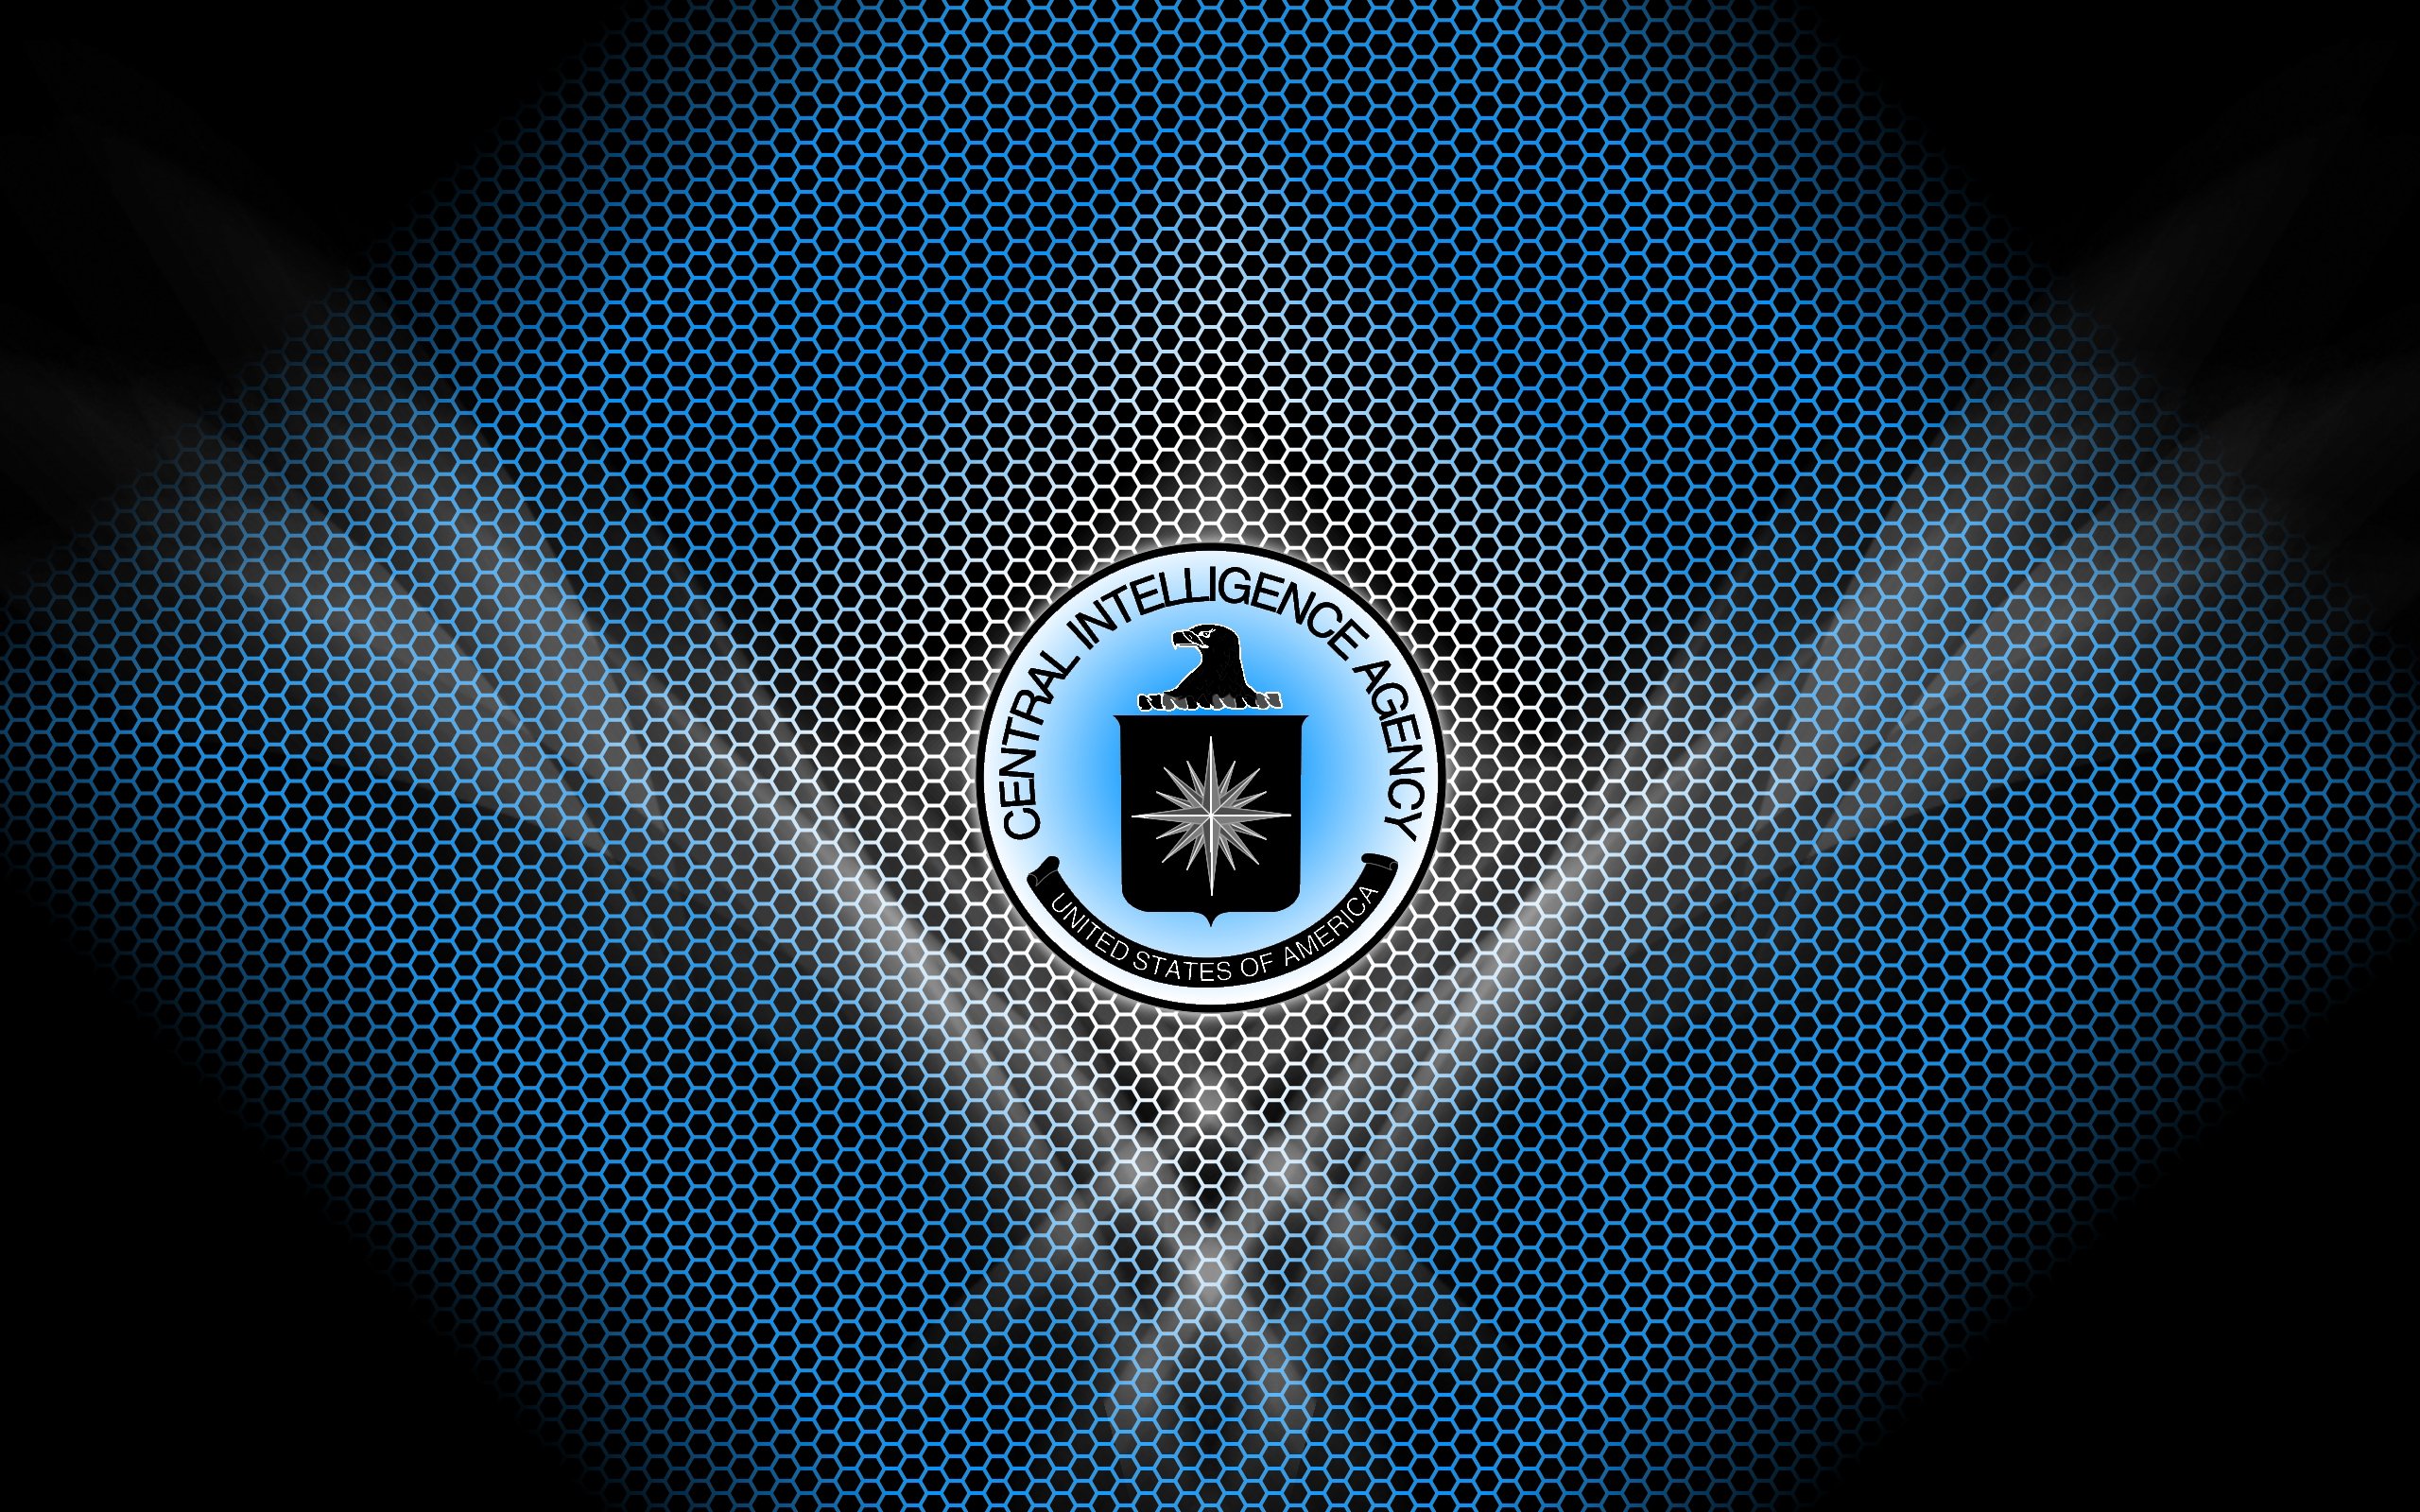 Top Ranked Intelligence Wallpaper, PC FWR HQFX